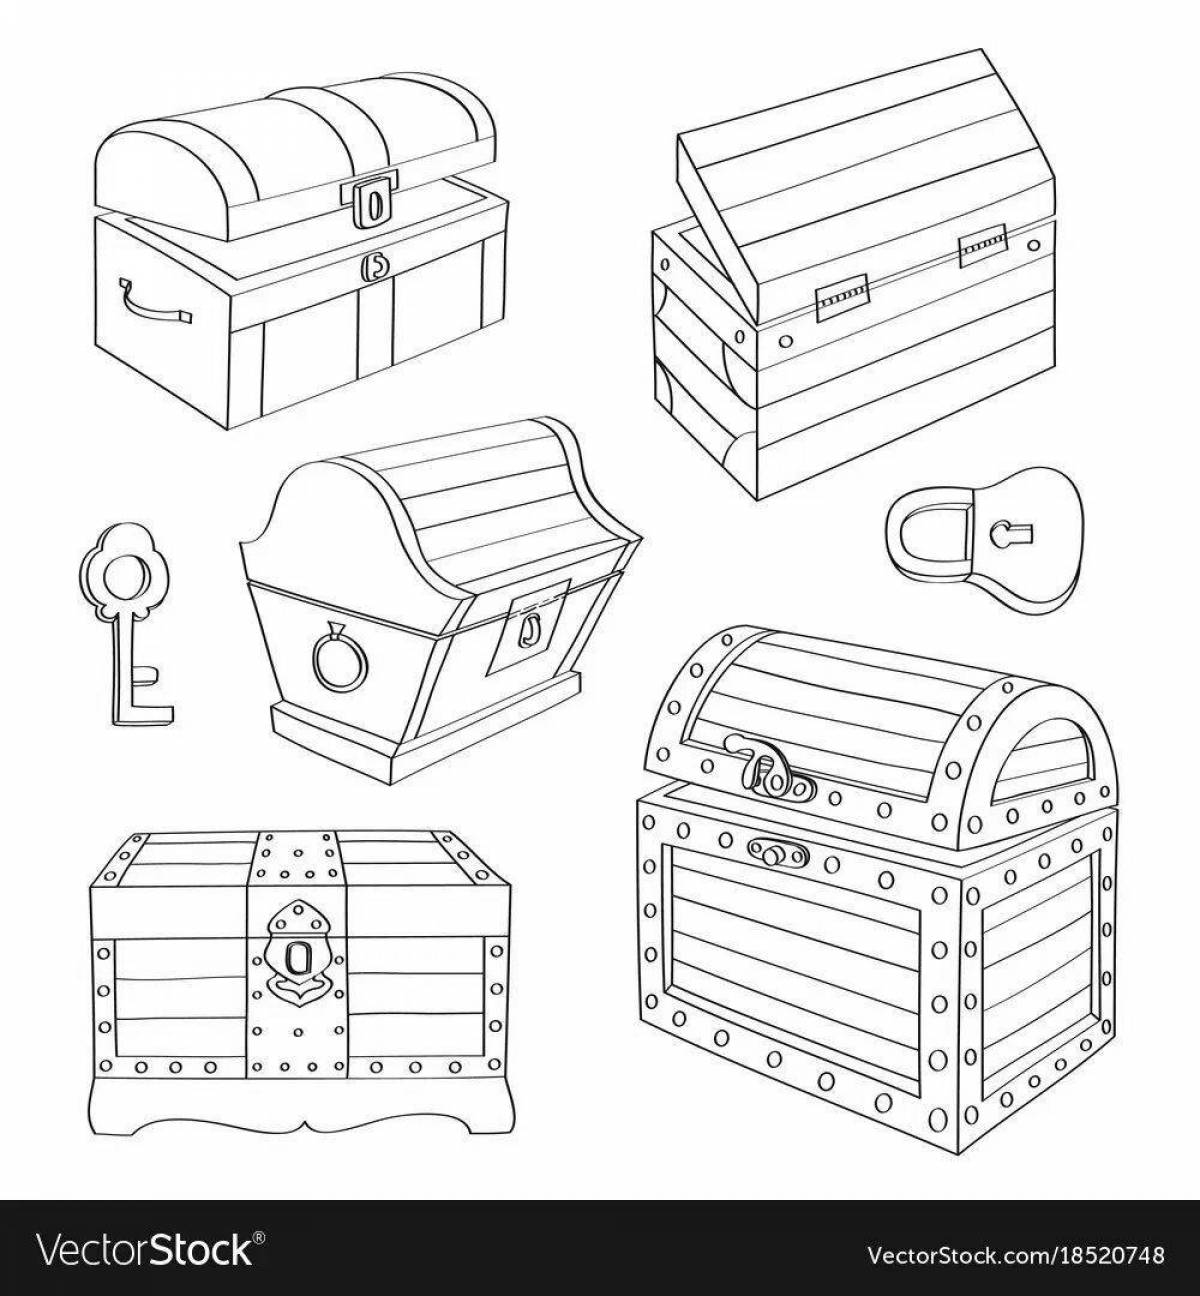 Glowing Jewelry Box coloring book for preschoolers